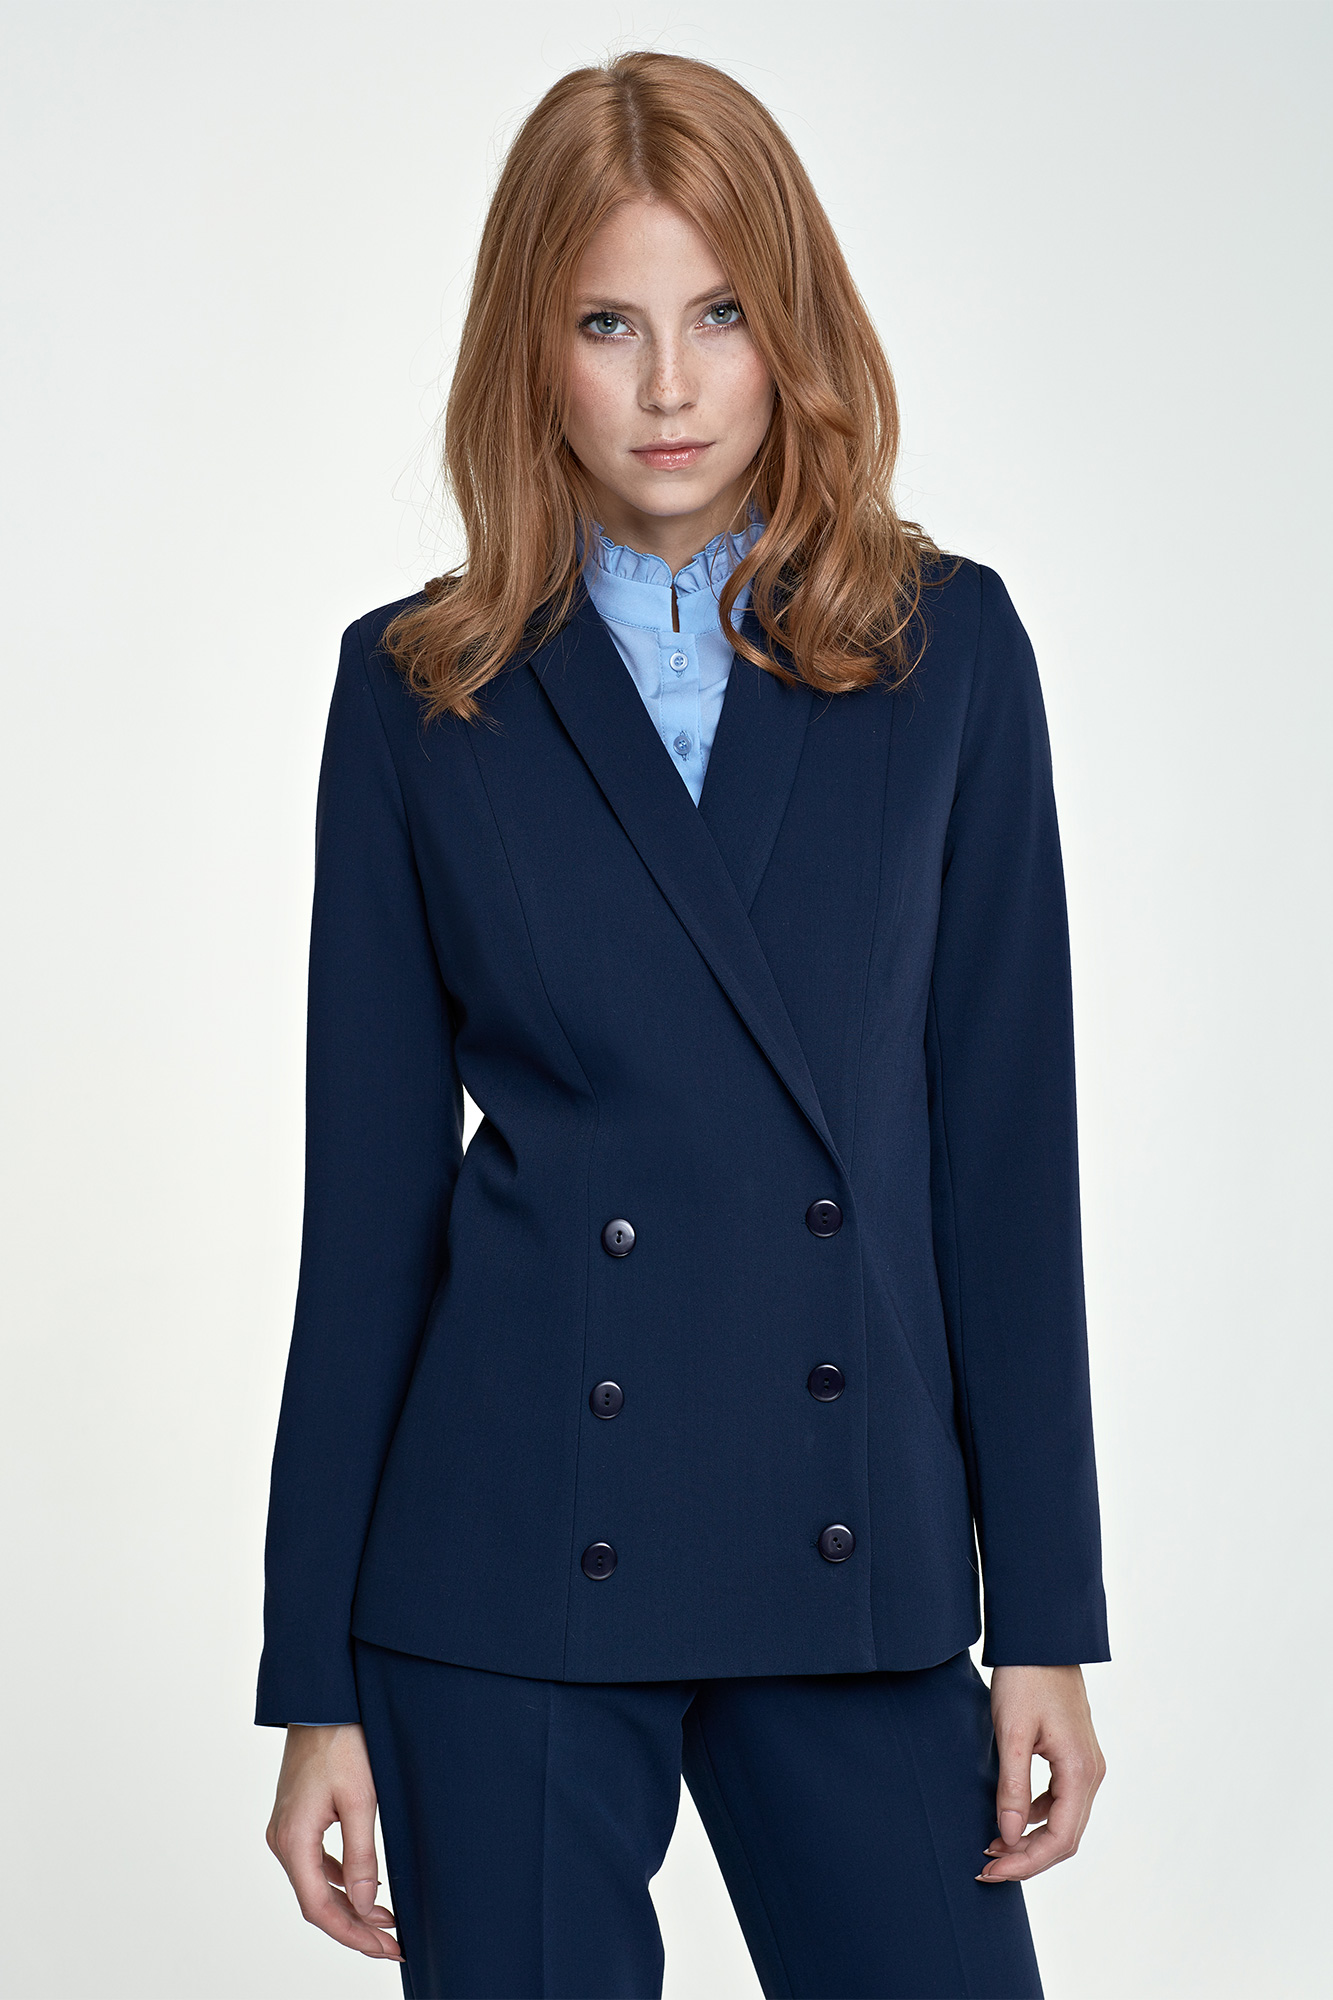 Women's fitted blazer, lined interior, navy blue.